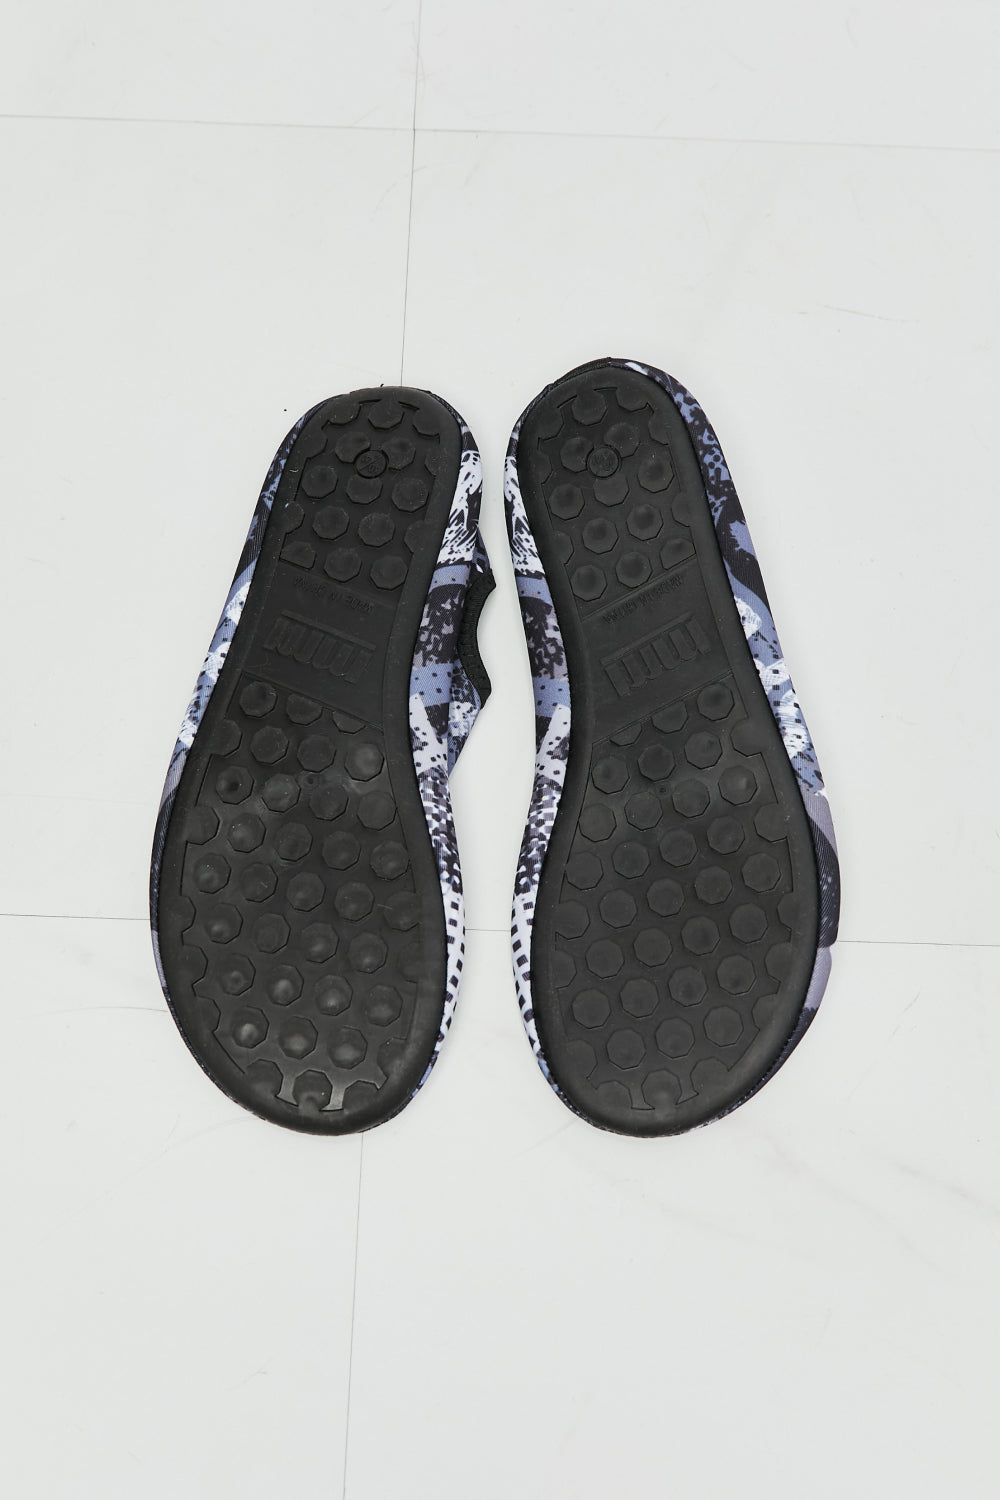 MMshoes On The Shore Water Shoes in Black Pattern Print on any thing USA/STOD clothes